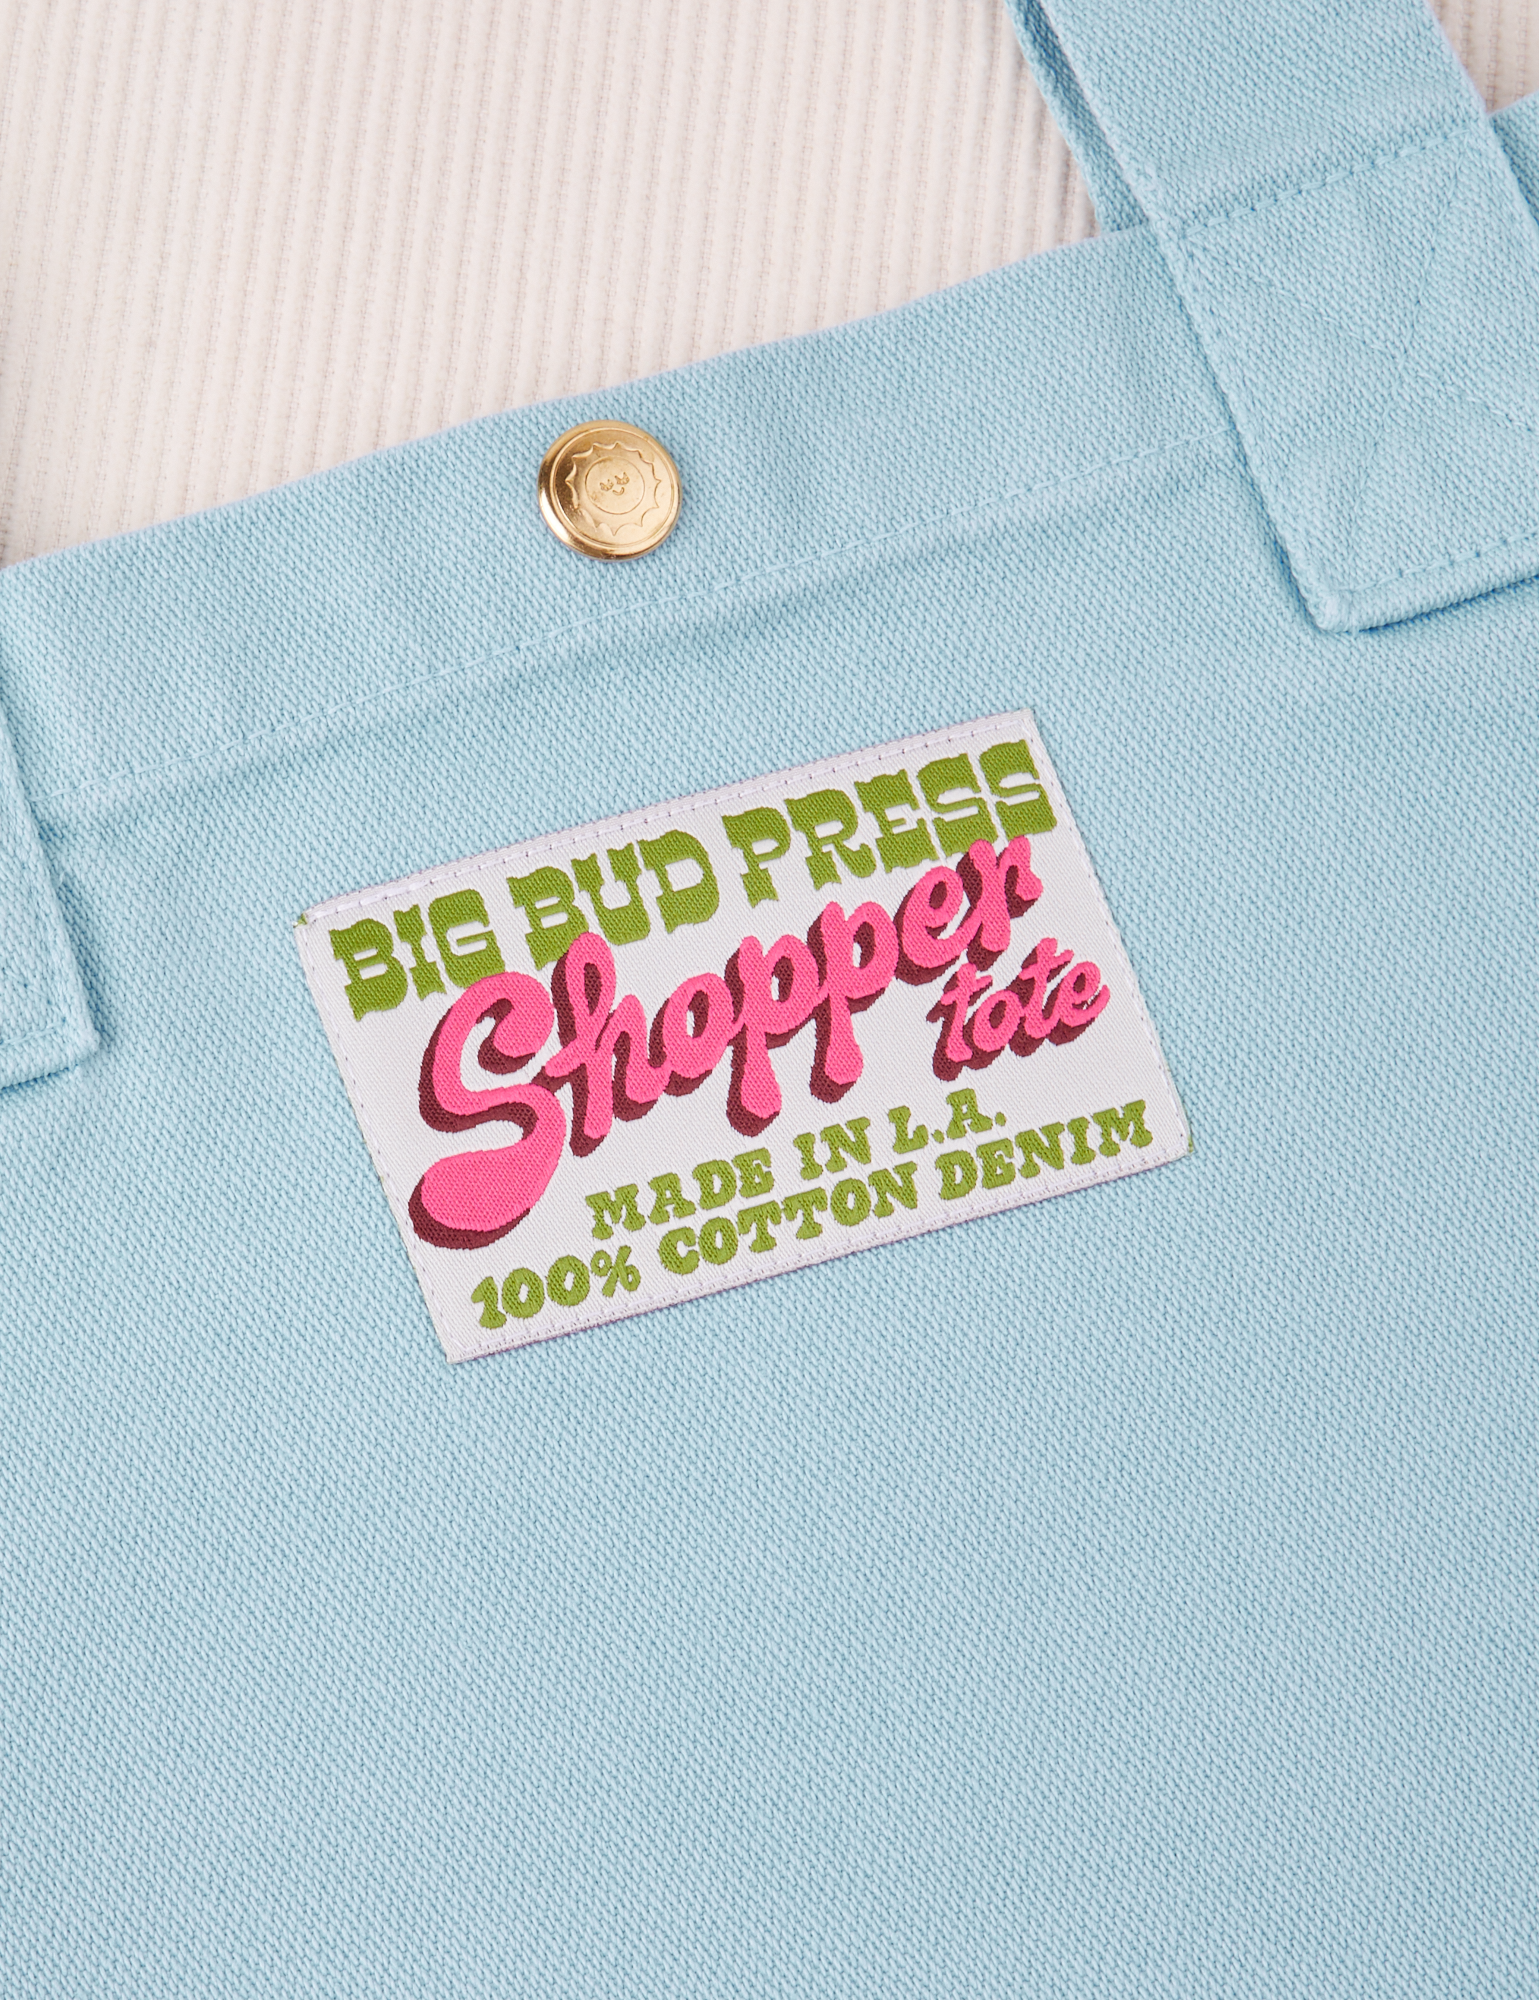 Sun Baby brass snap on Shopper Tote Bag in Baby Blue. Bag label with green and pink text that reads &quot;Big Bud Press Shopper Tote, Made in L.A., 100% Cotton Denim&quot; on white background